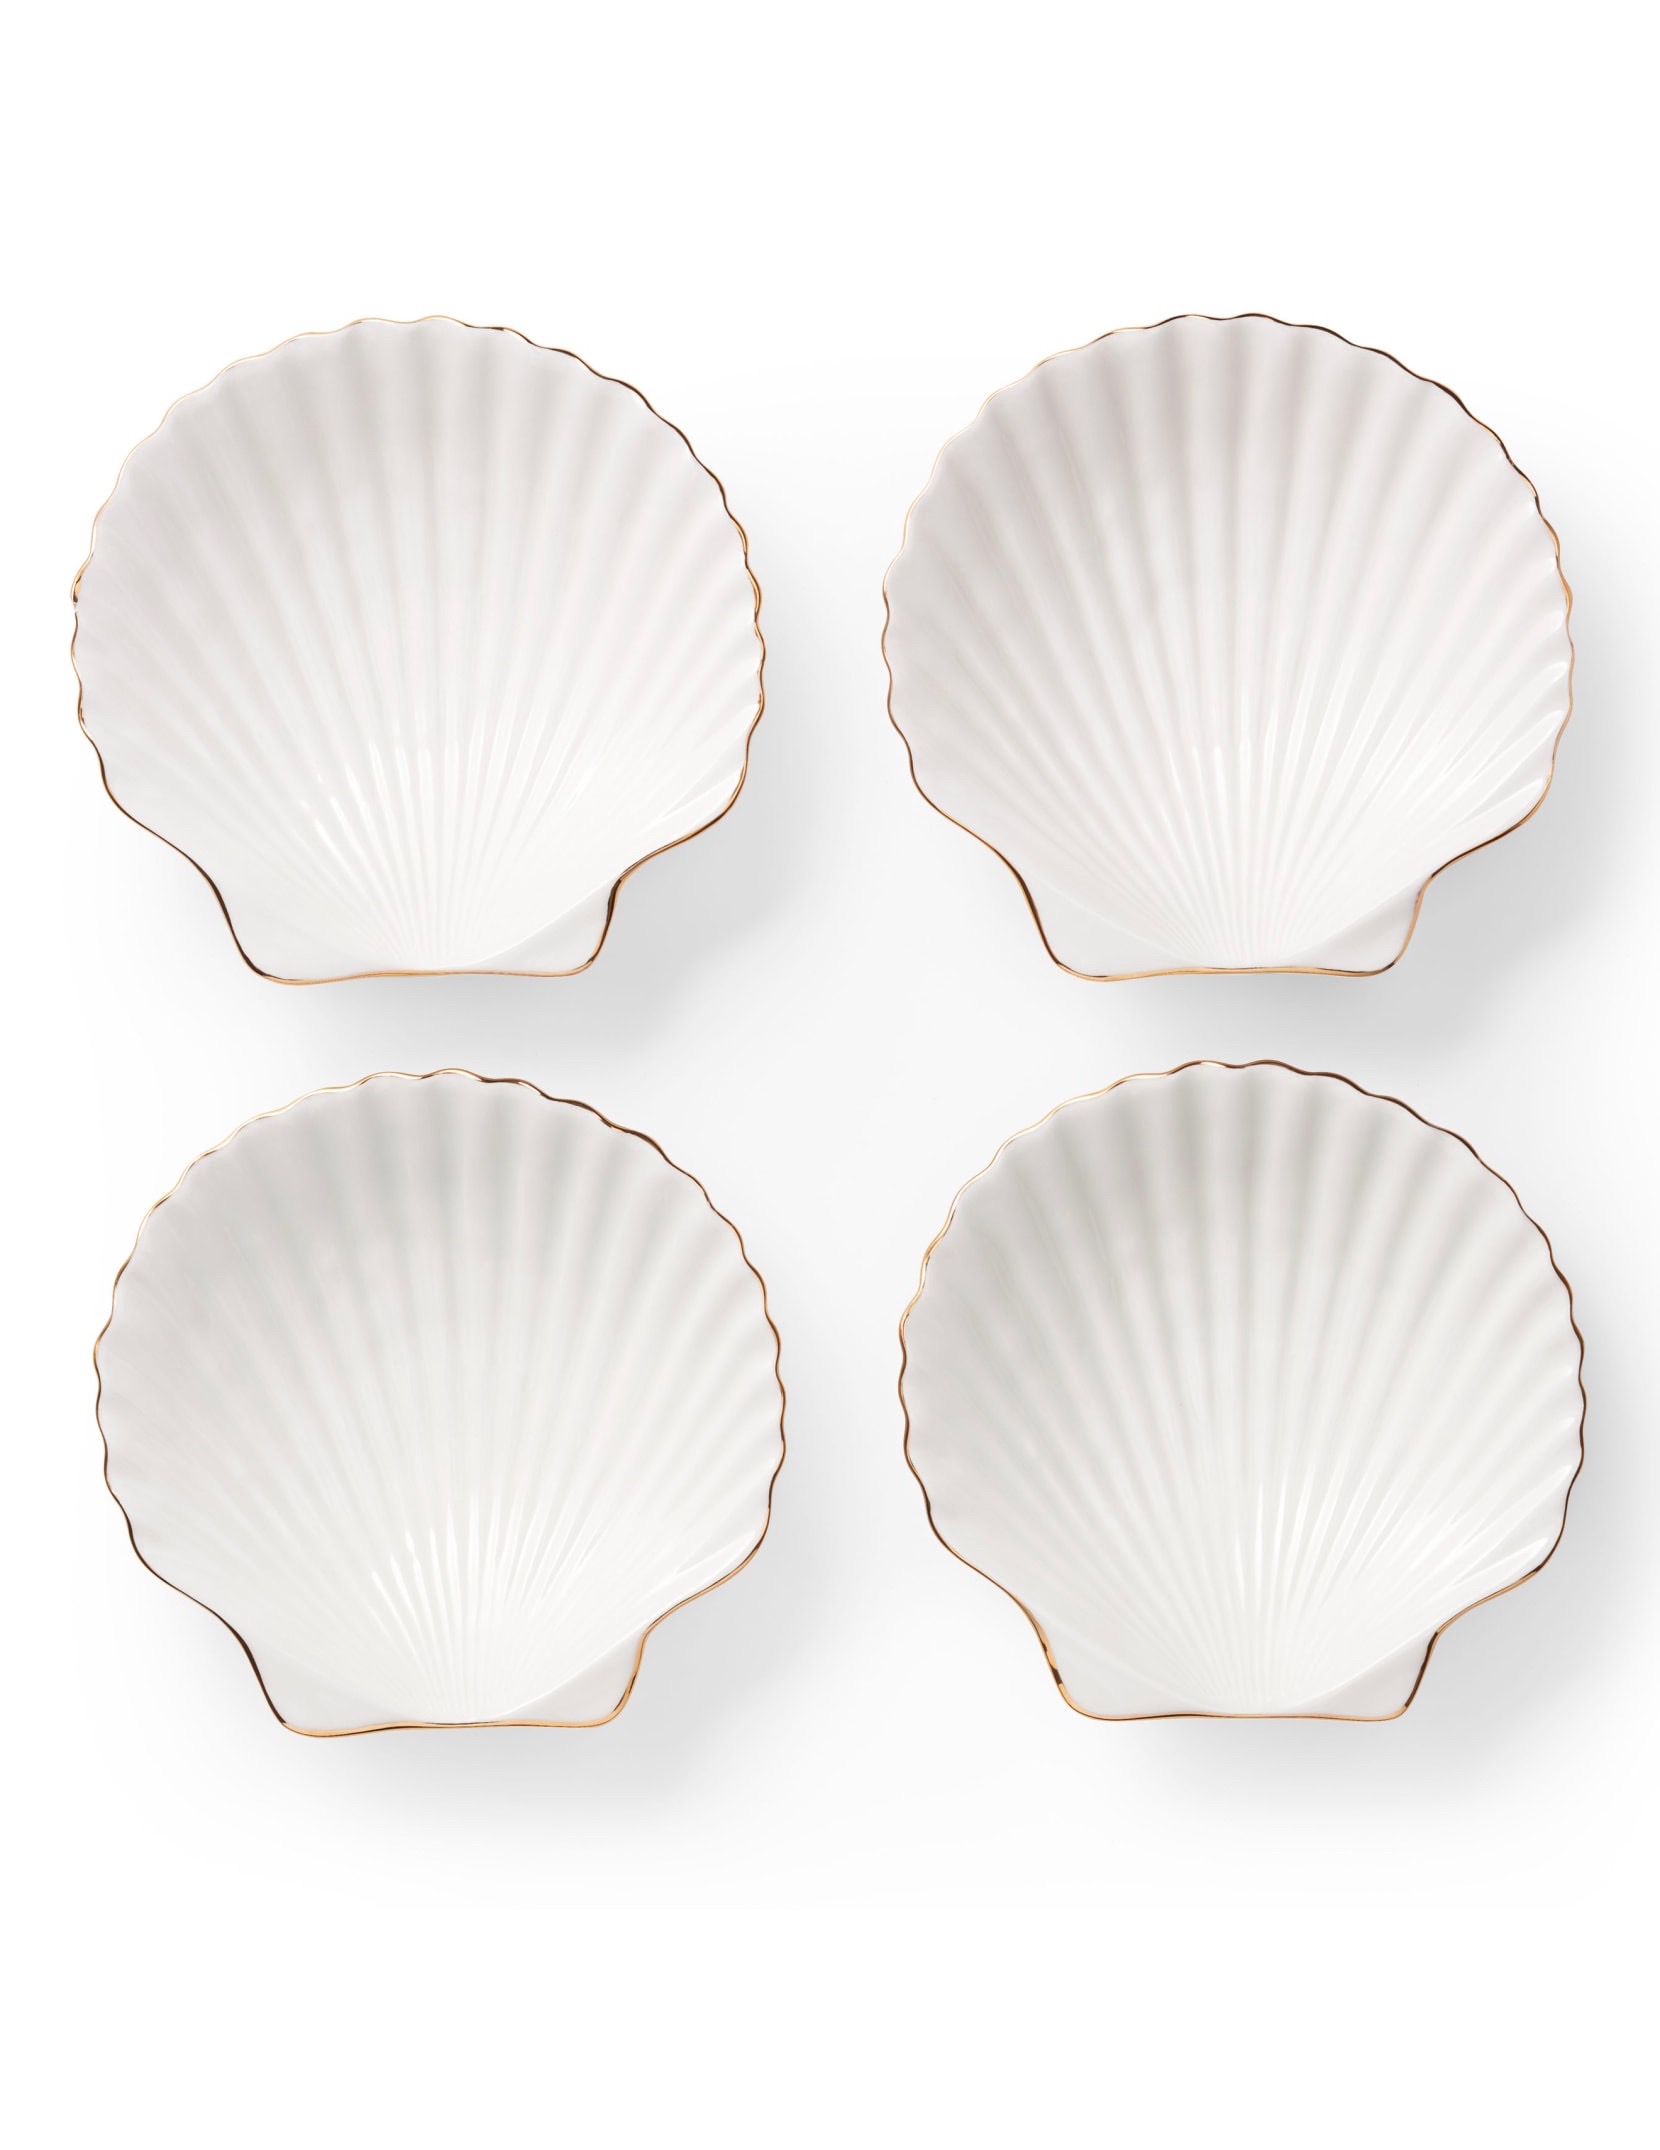 Shell Appetizer Plates with Gold Rim